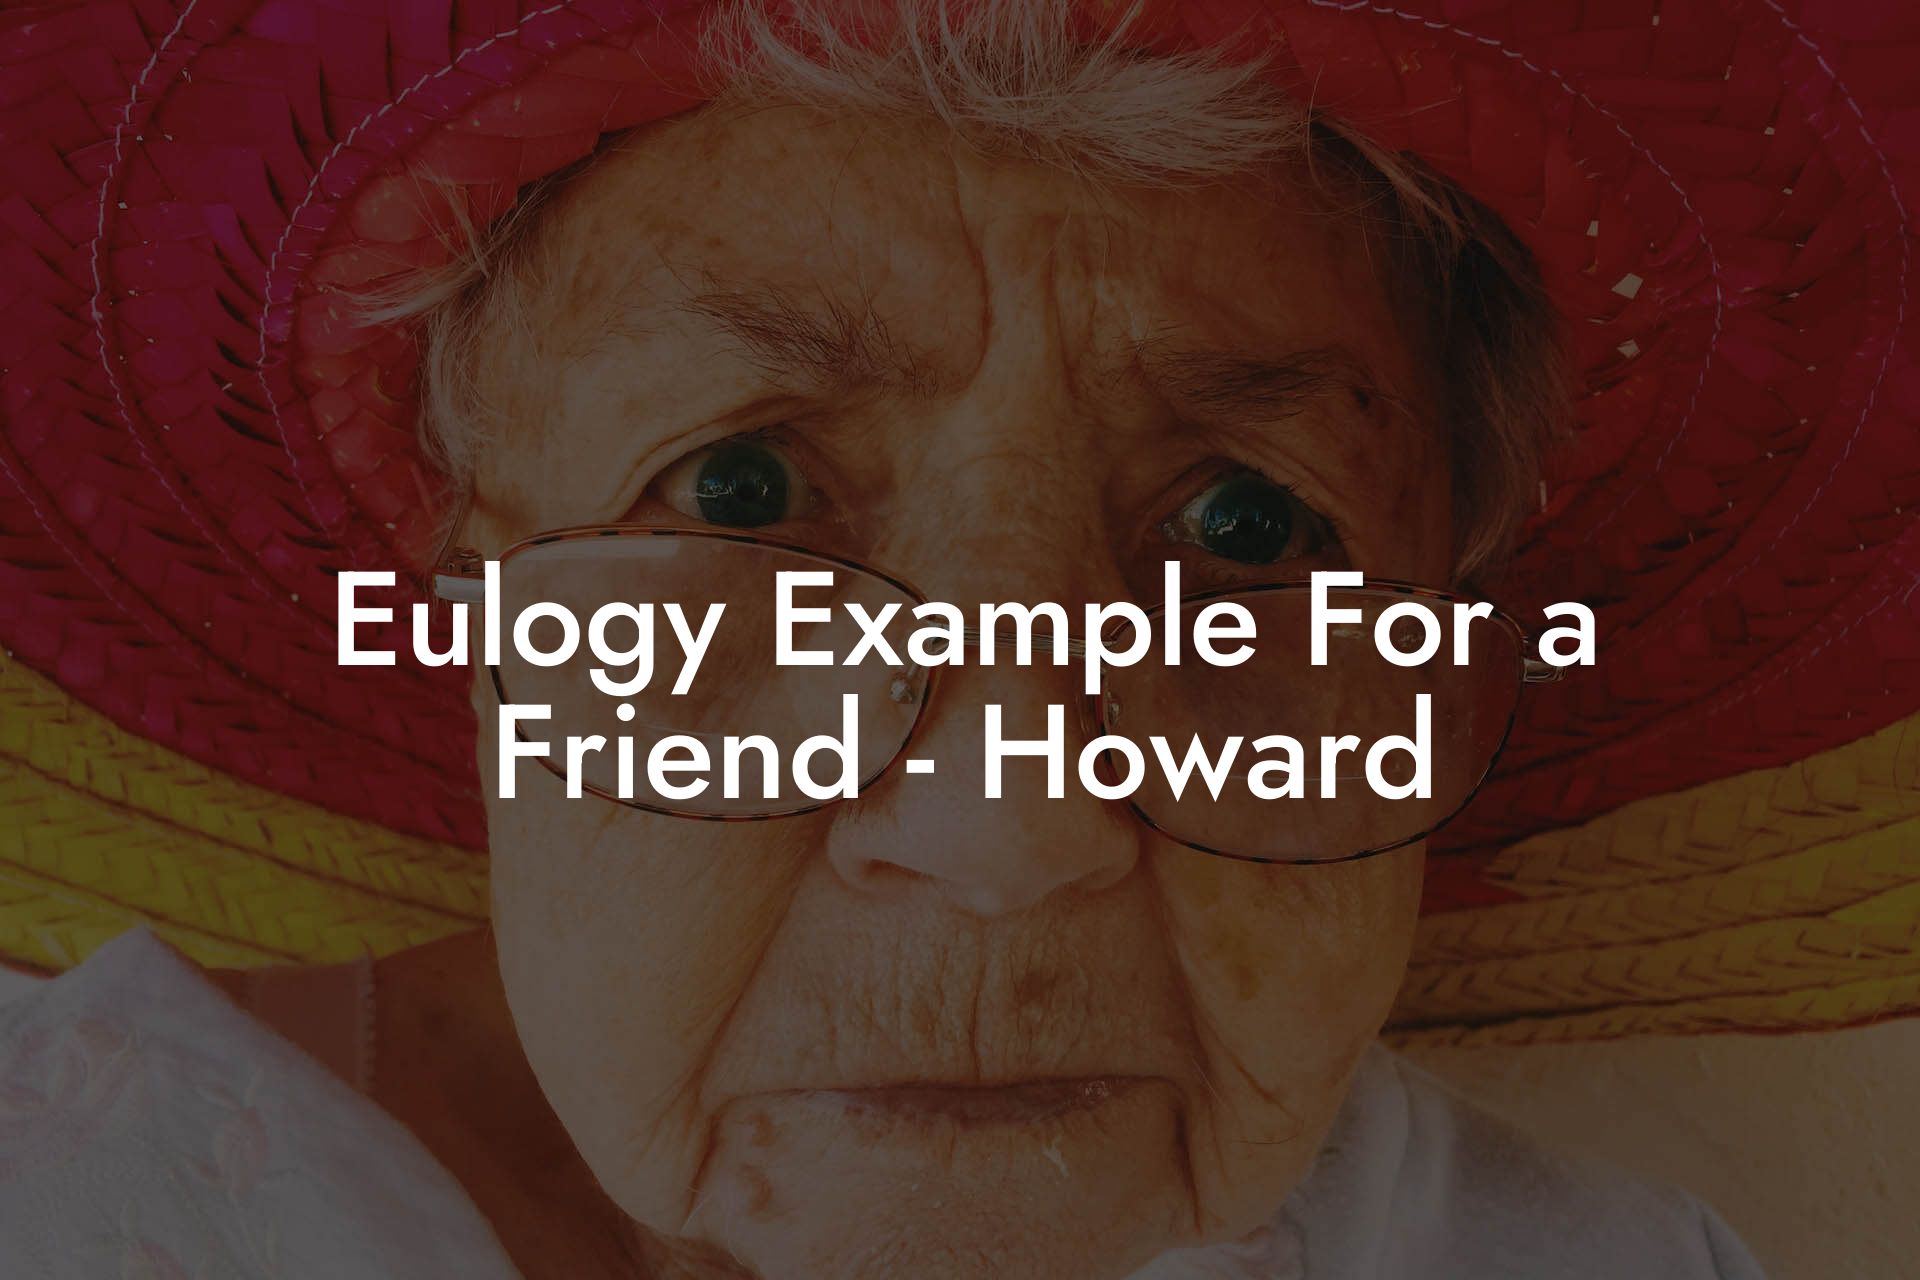 Eulogy Example For a Friend - Howard